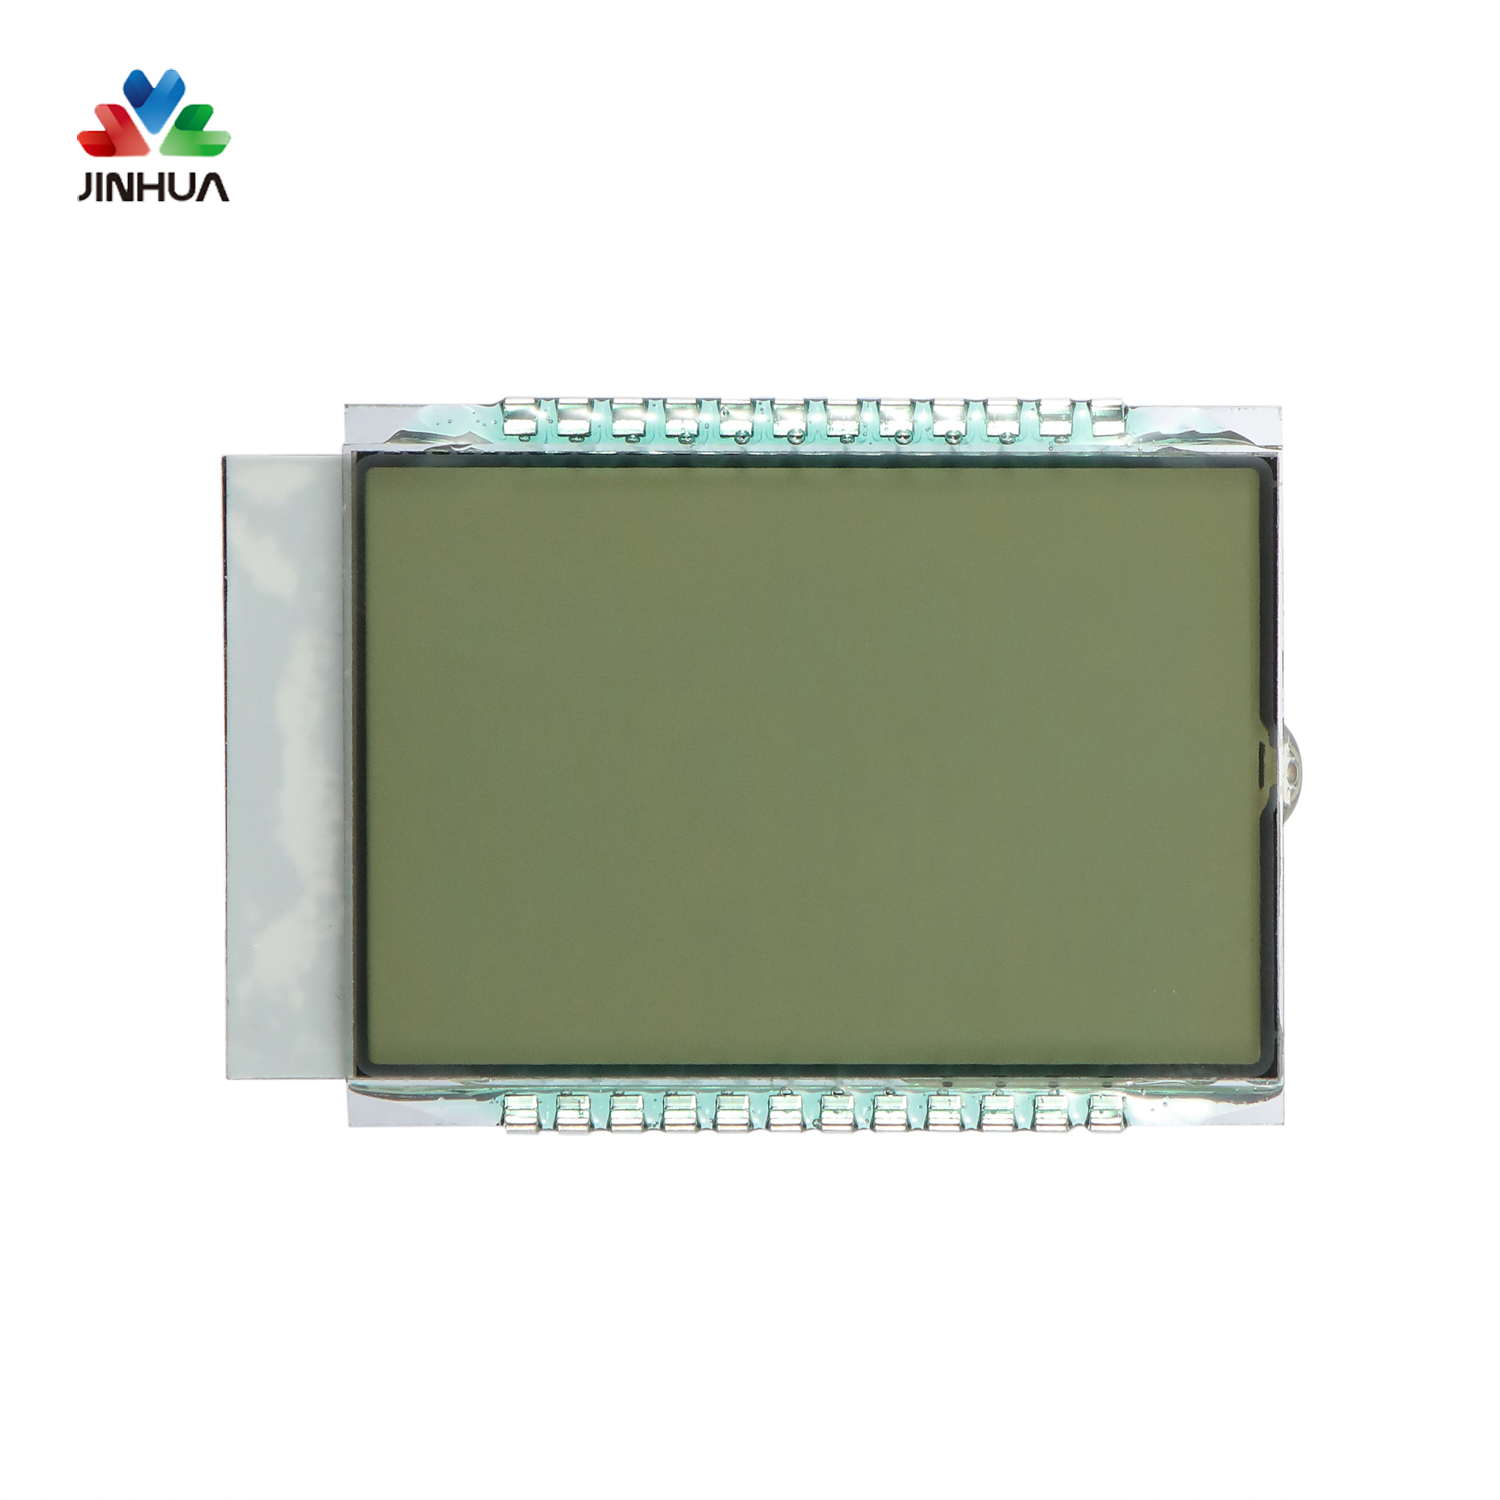 Pins Positive Transmissive HTN Segment LCD Display with Backlight